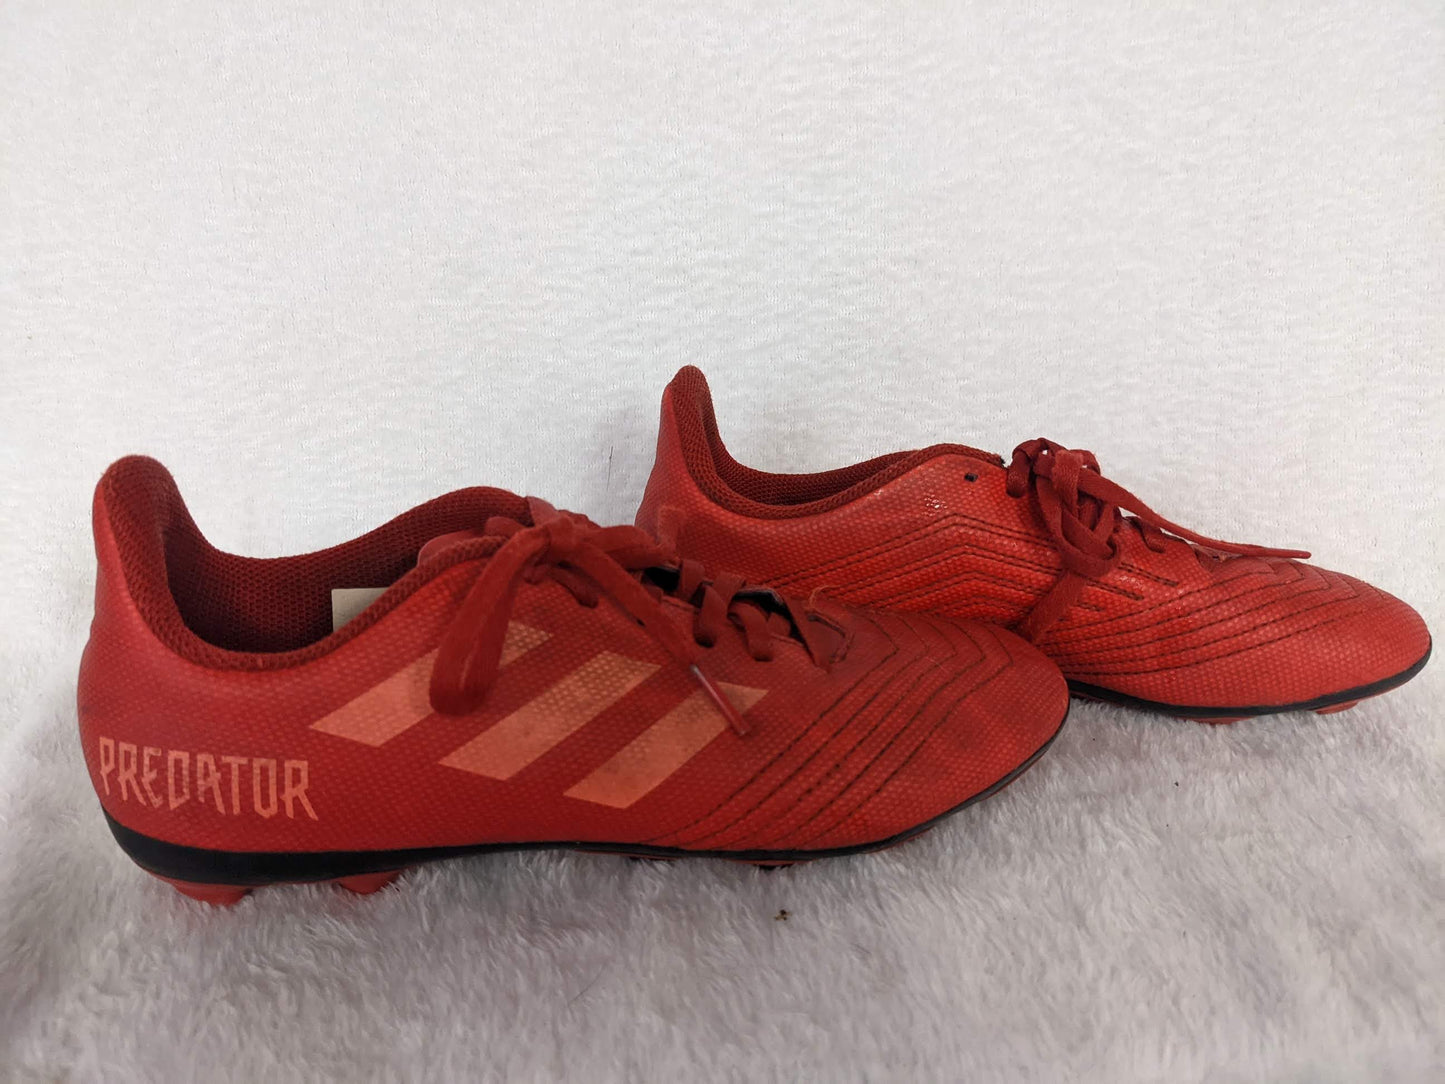 Adidas Predator Youth Cleats Size 4 Color Red Condition Used